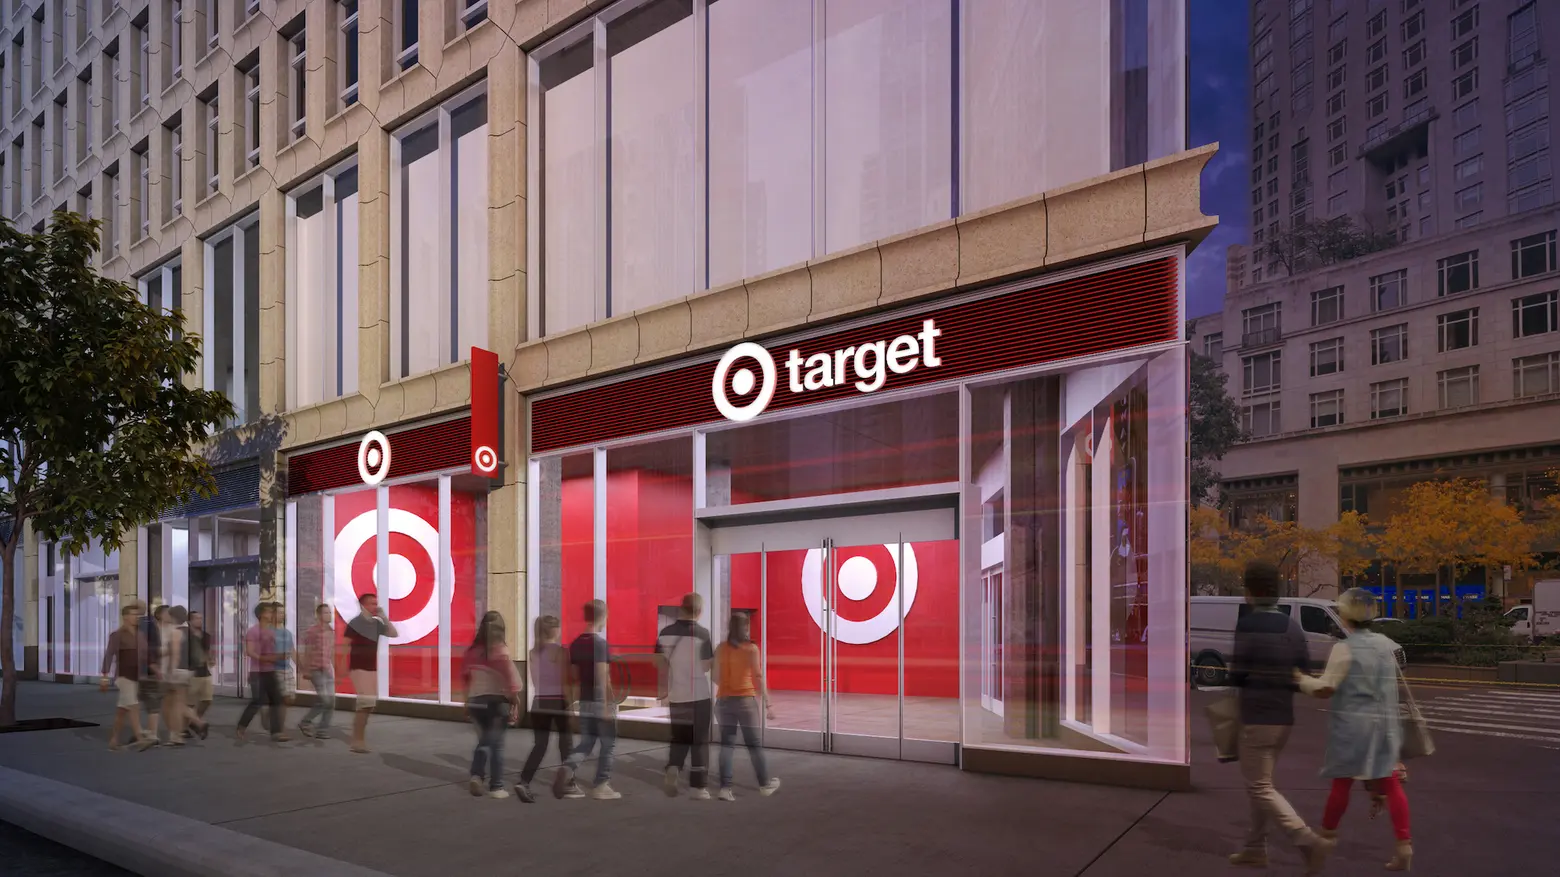 Columbus Circle is getting a ‘small-format’ Target next year